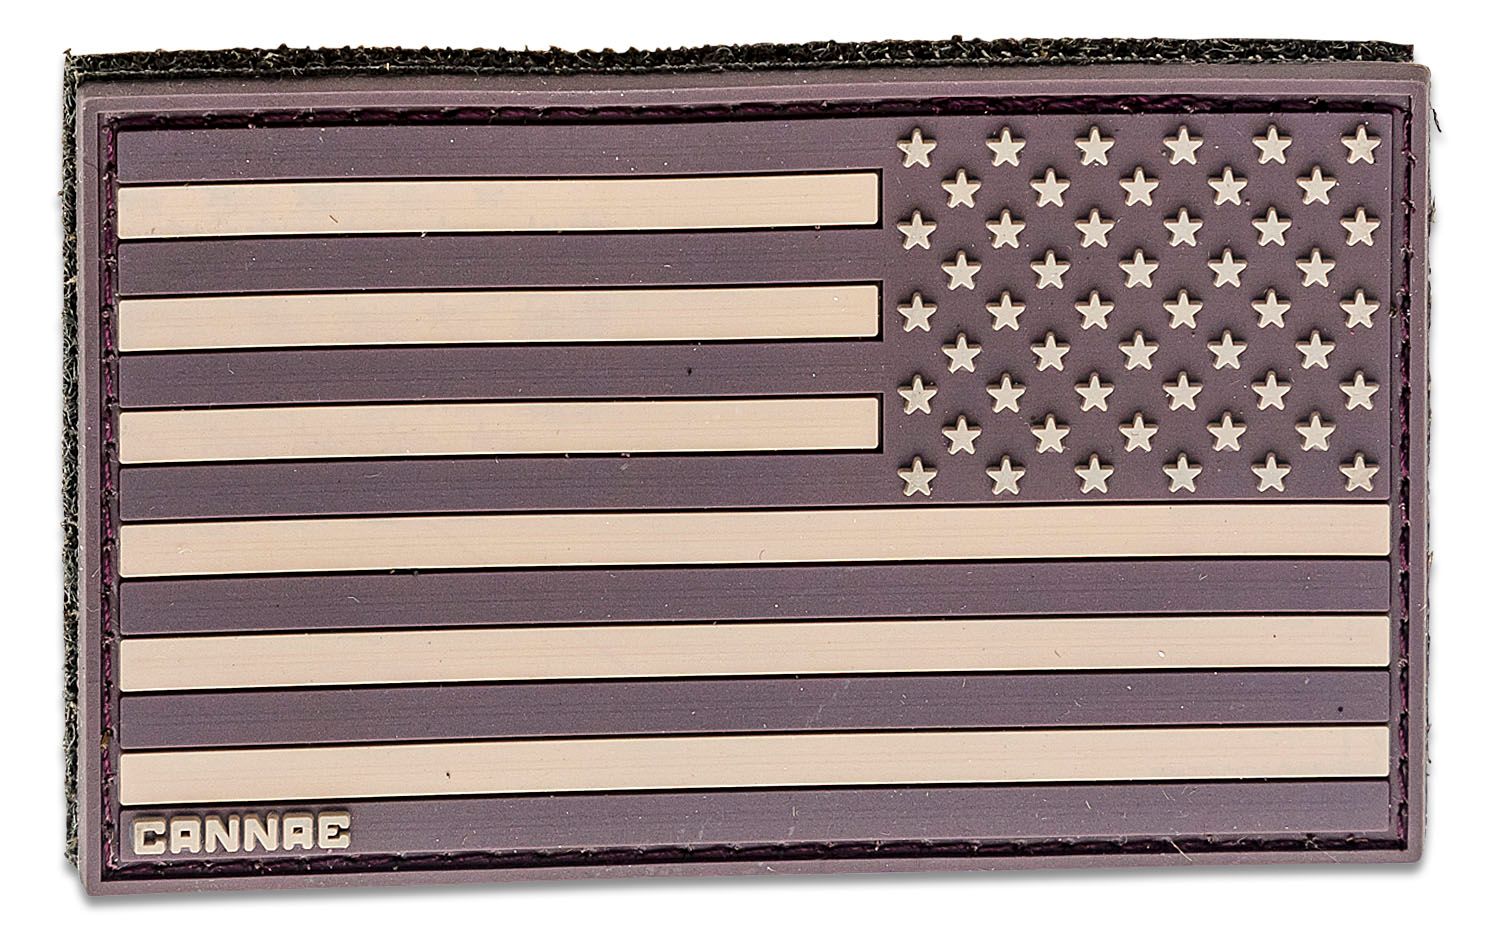 Cannae Pro Gear USA Velcro Patch, Right Arm, Coyote